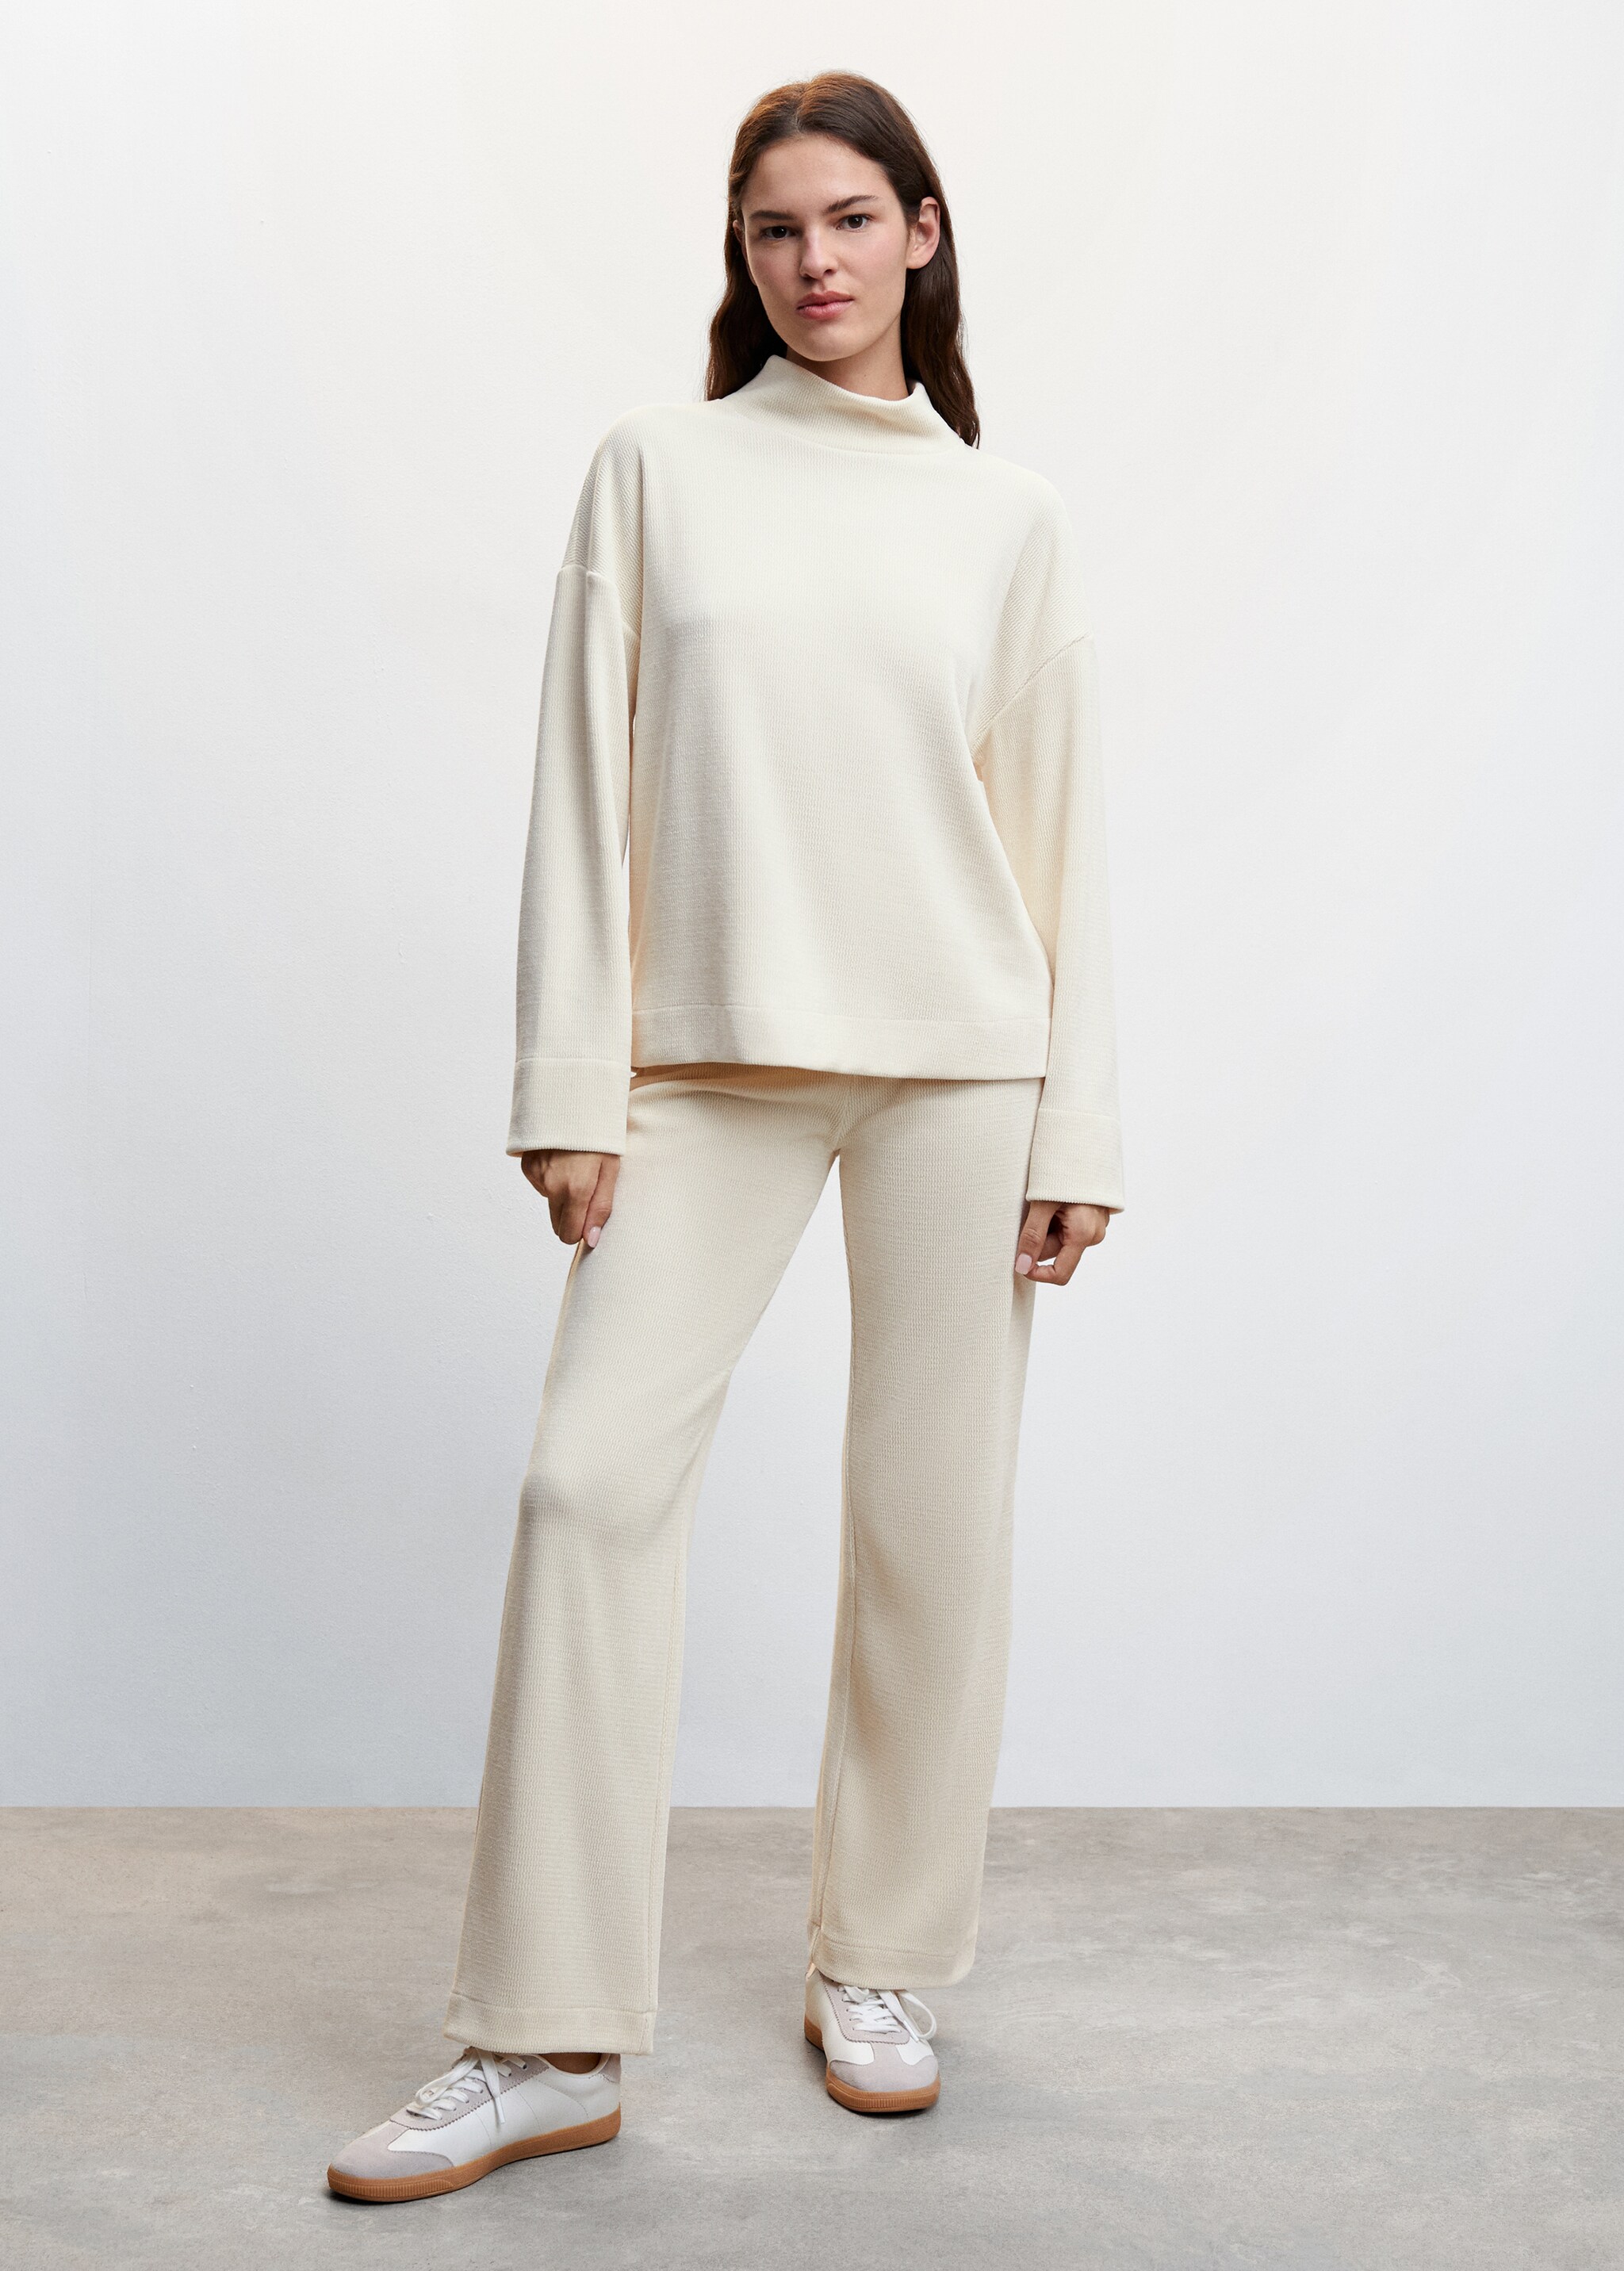 Ribbed knit trousers - General plane